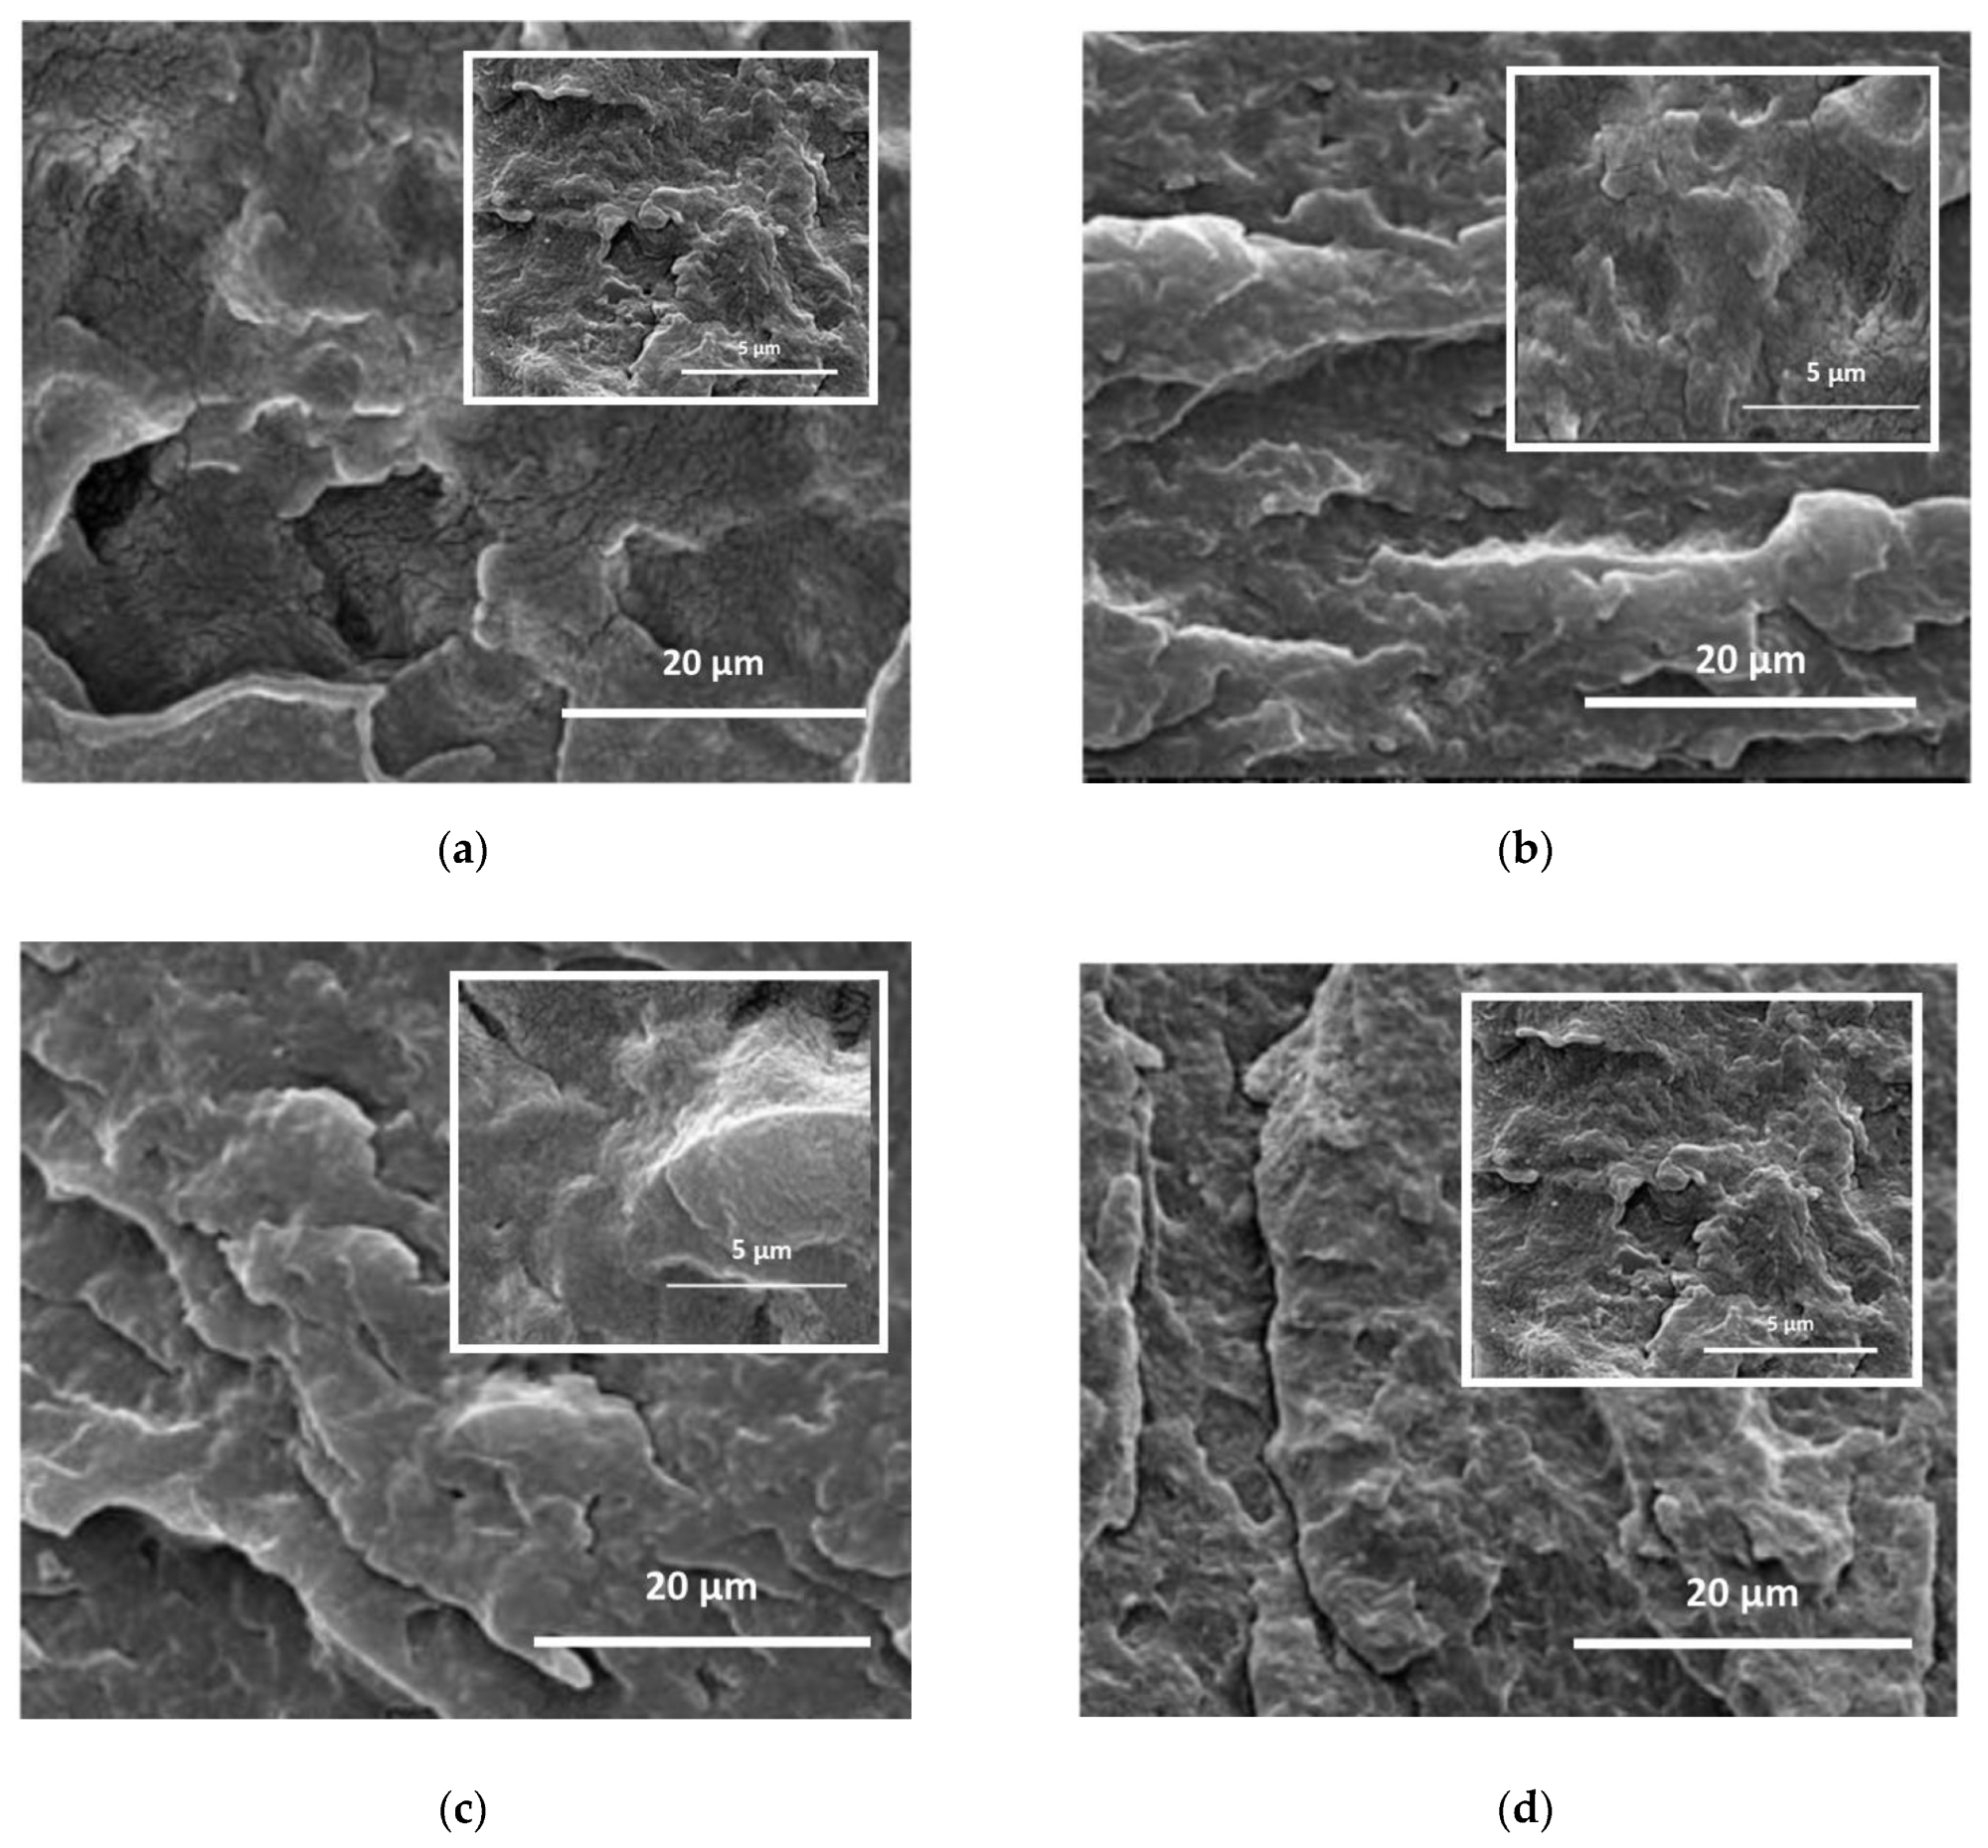 SEM images at different magnifications of (a) PA11/LDH-NO3, (b) PA11/LDH-HALS1, (c) PA11/LDH-HALS2 and (d) PA11/LDH-HALSadded.